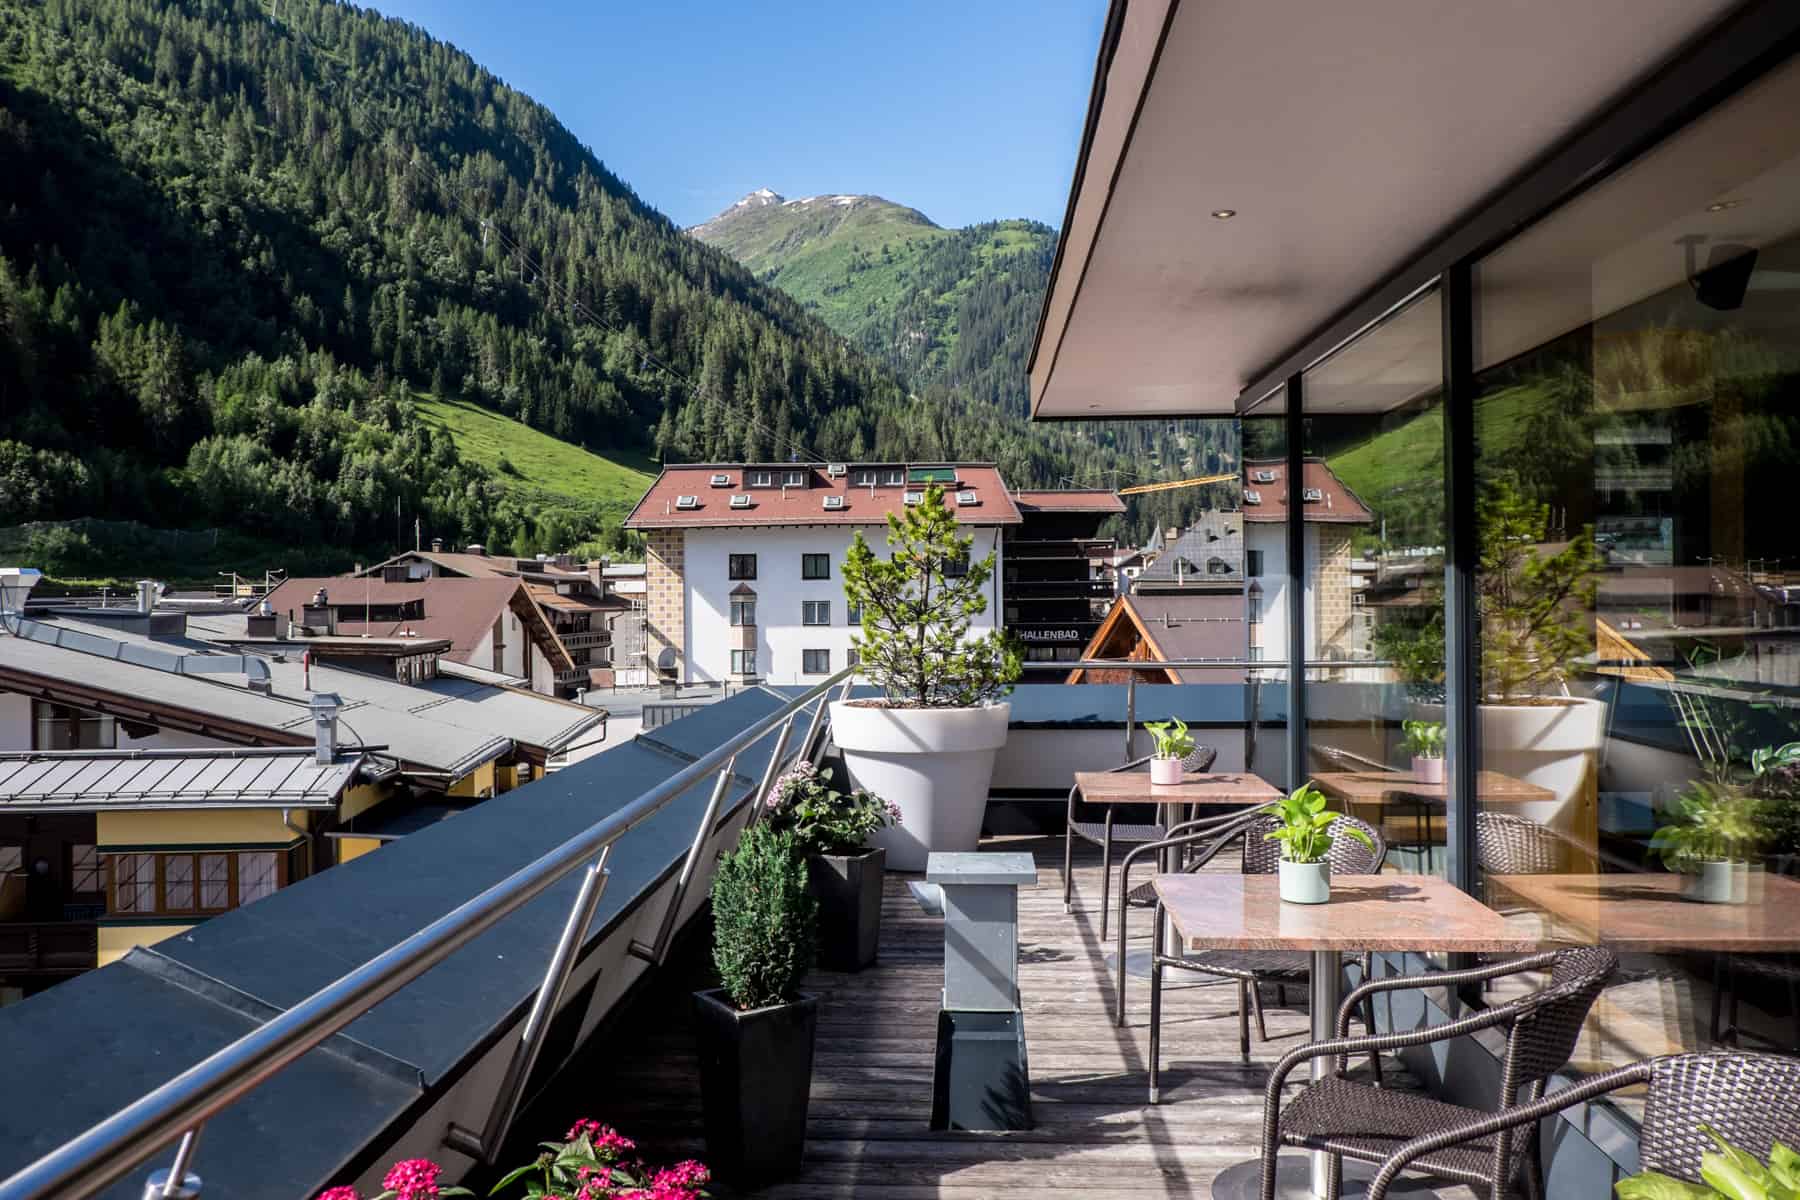 The mountain view roof terrace of the M3 Hotel St Anton am Arlberg